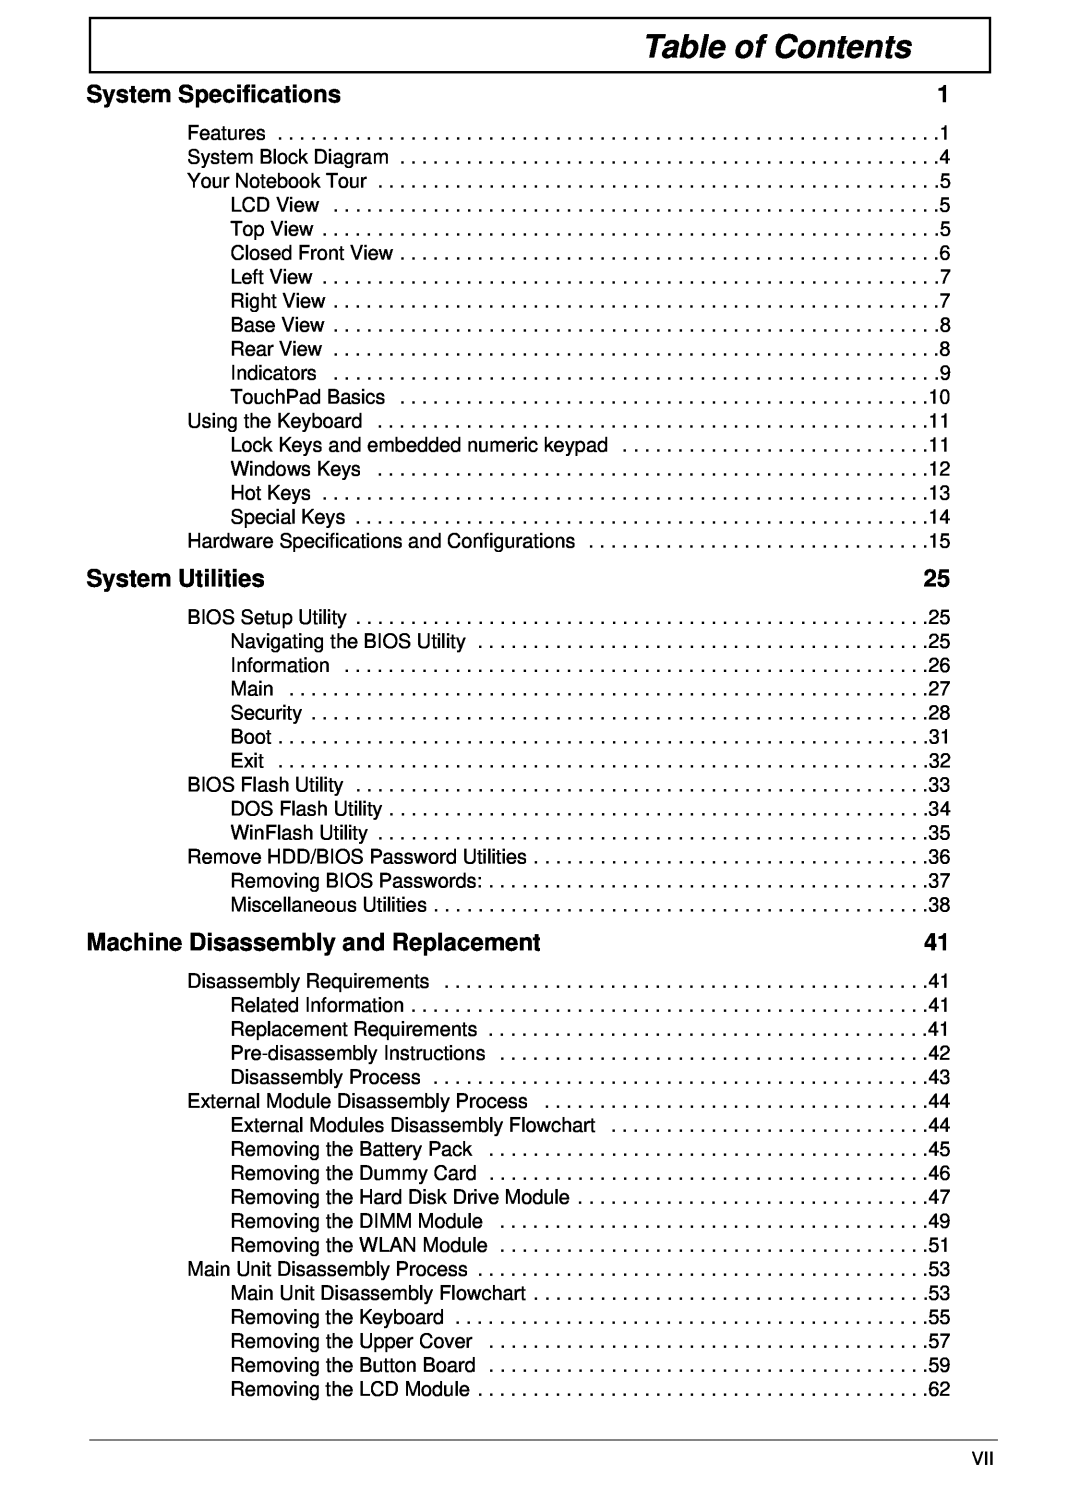 Gateway EC14 manual Table of Contents, System Specifications, System Utilities, Machine Disassembly and Replacement 